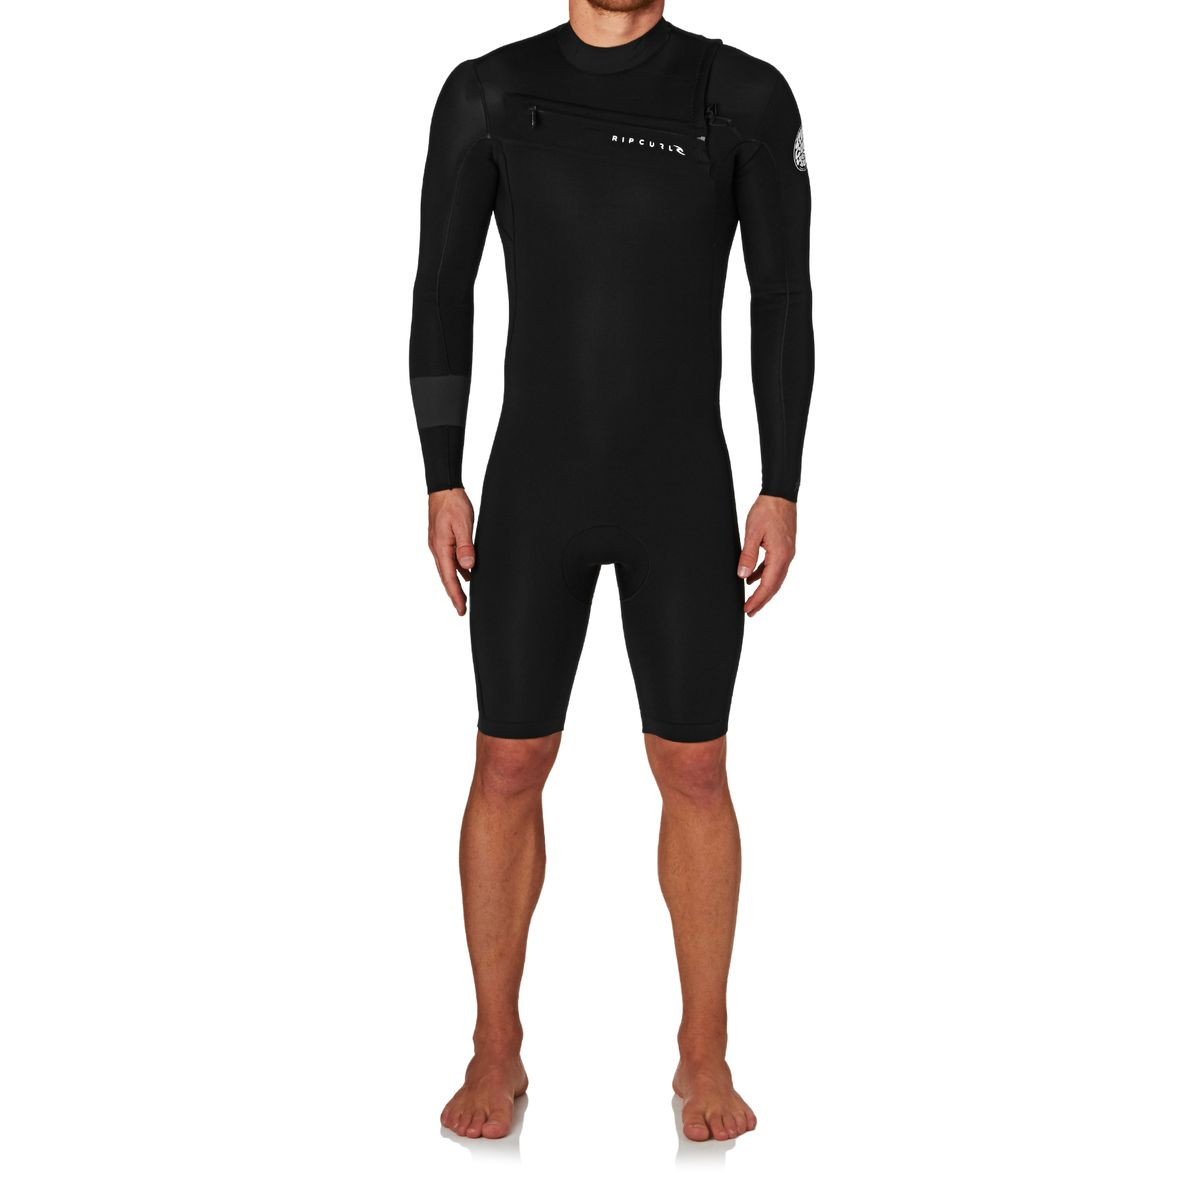 Rip Curl Aggrolite 2mm 2017 Chest Zip Long Sleeve Shorty Wetsuit - Black